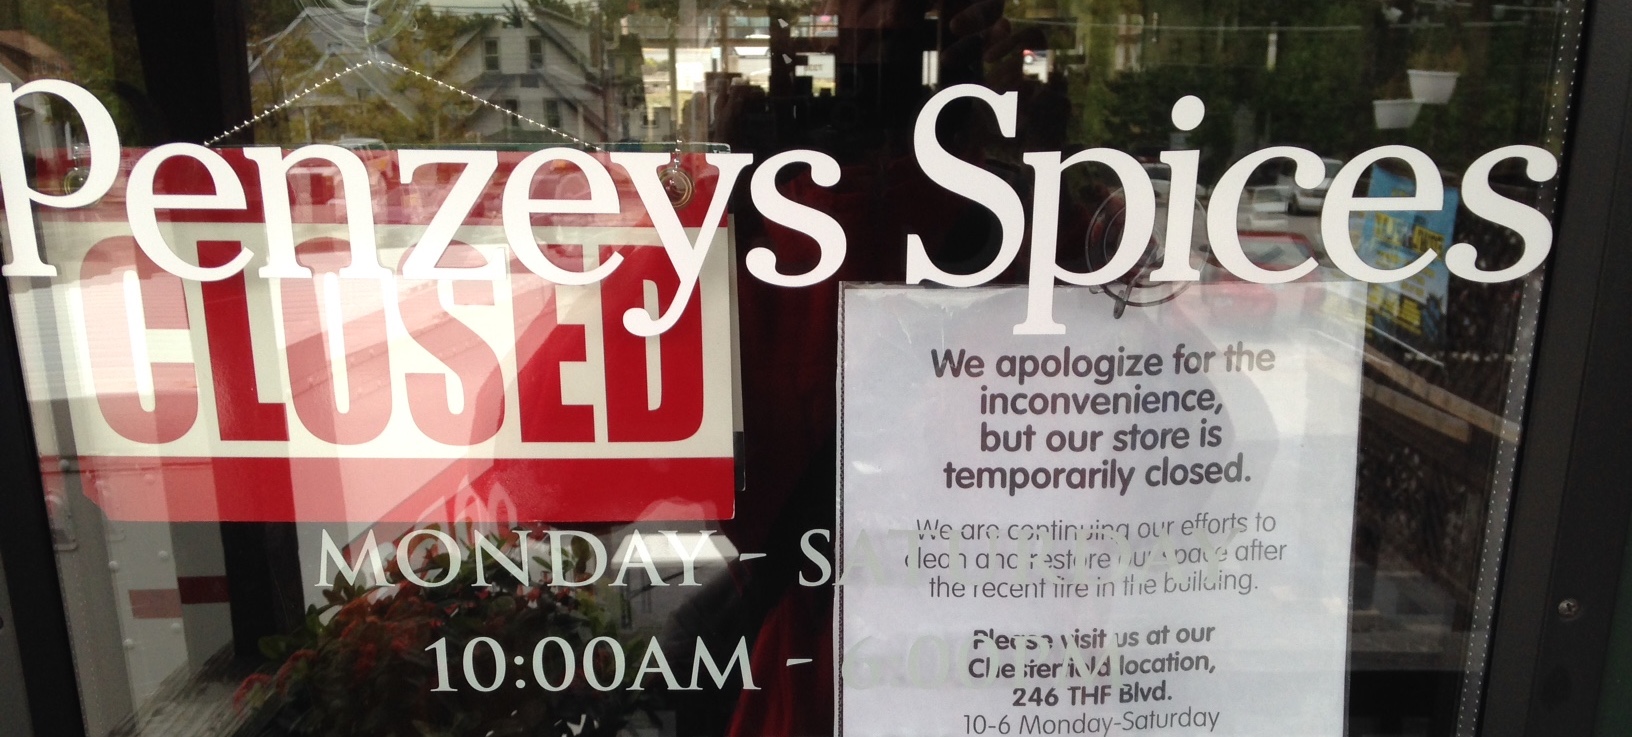 Maplewood Penzeys recouping from fire: reopening date uncertain